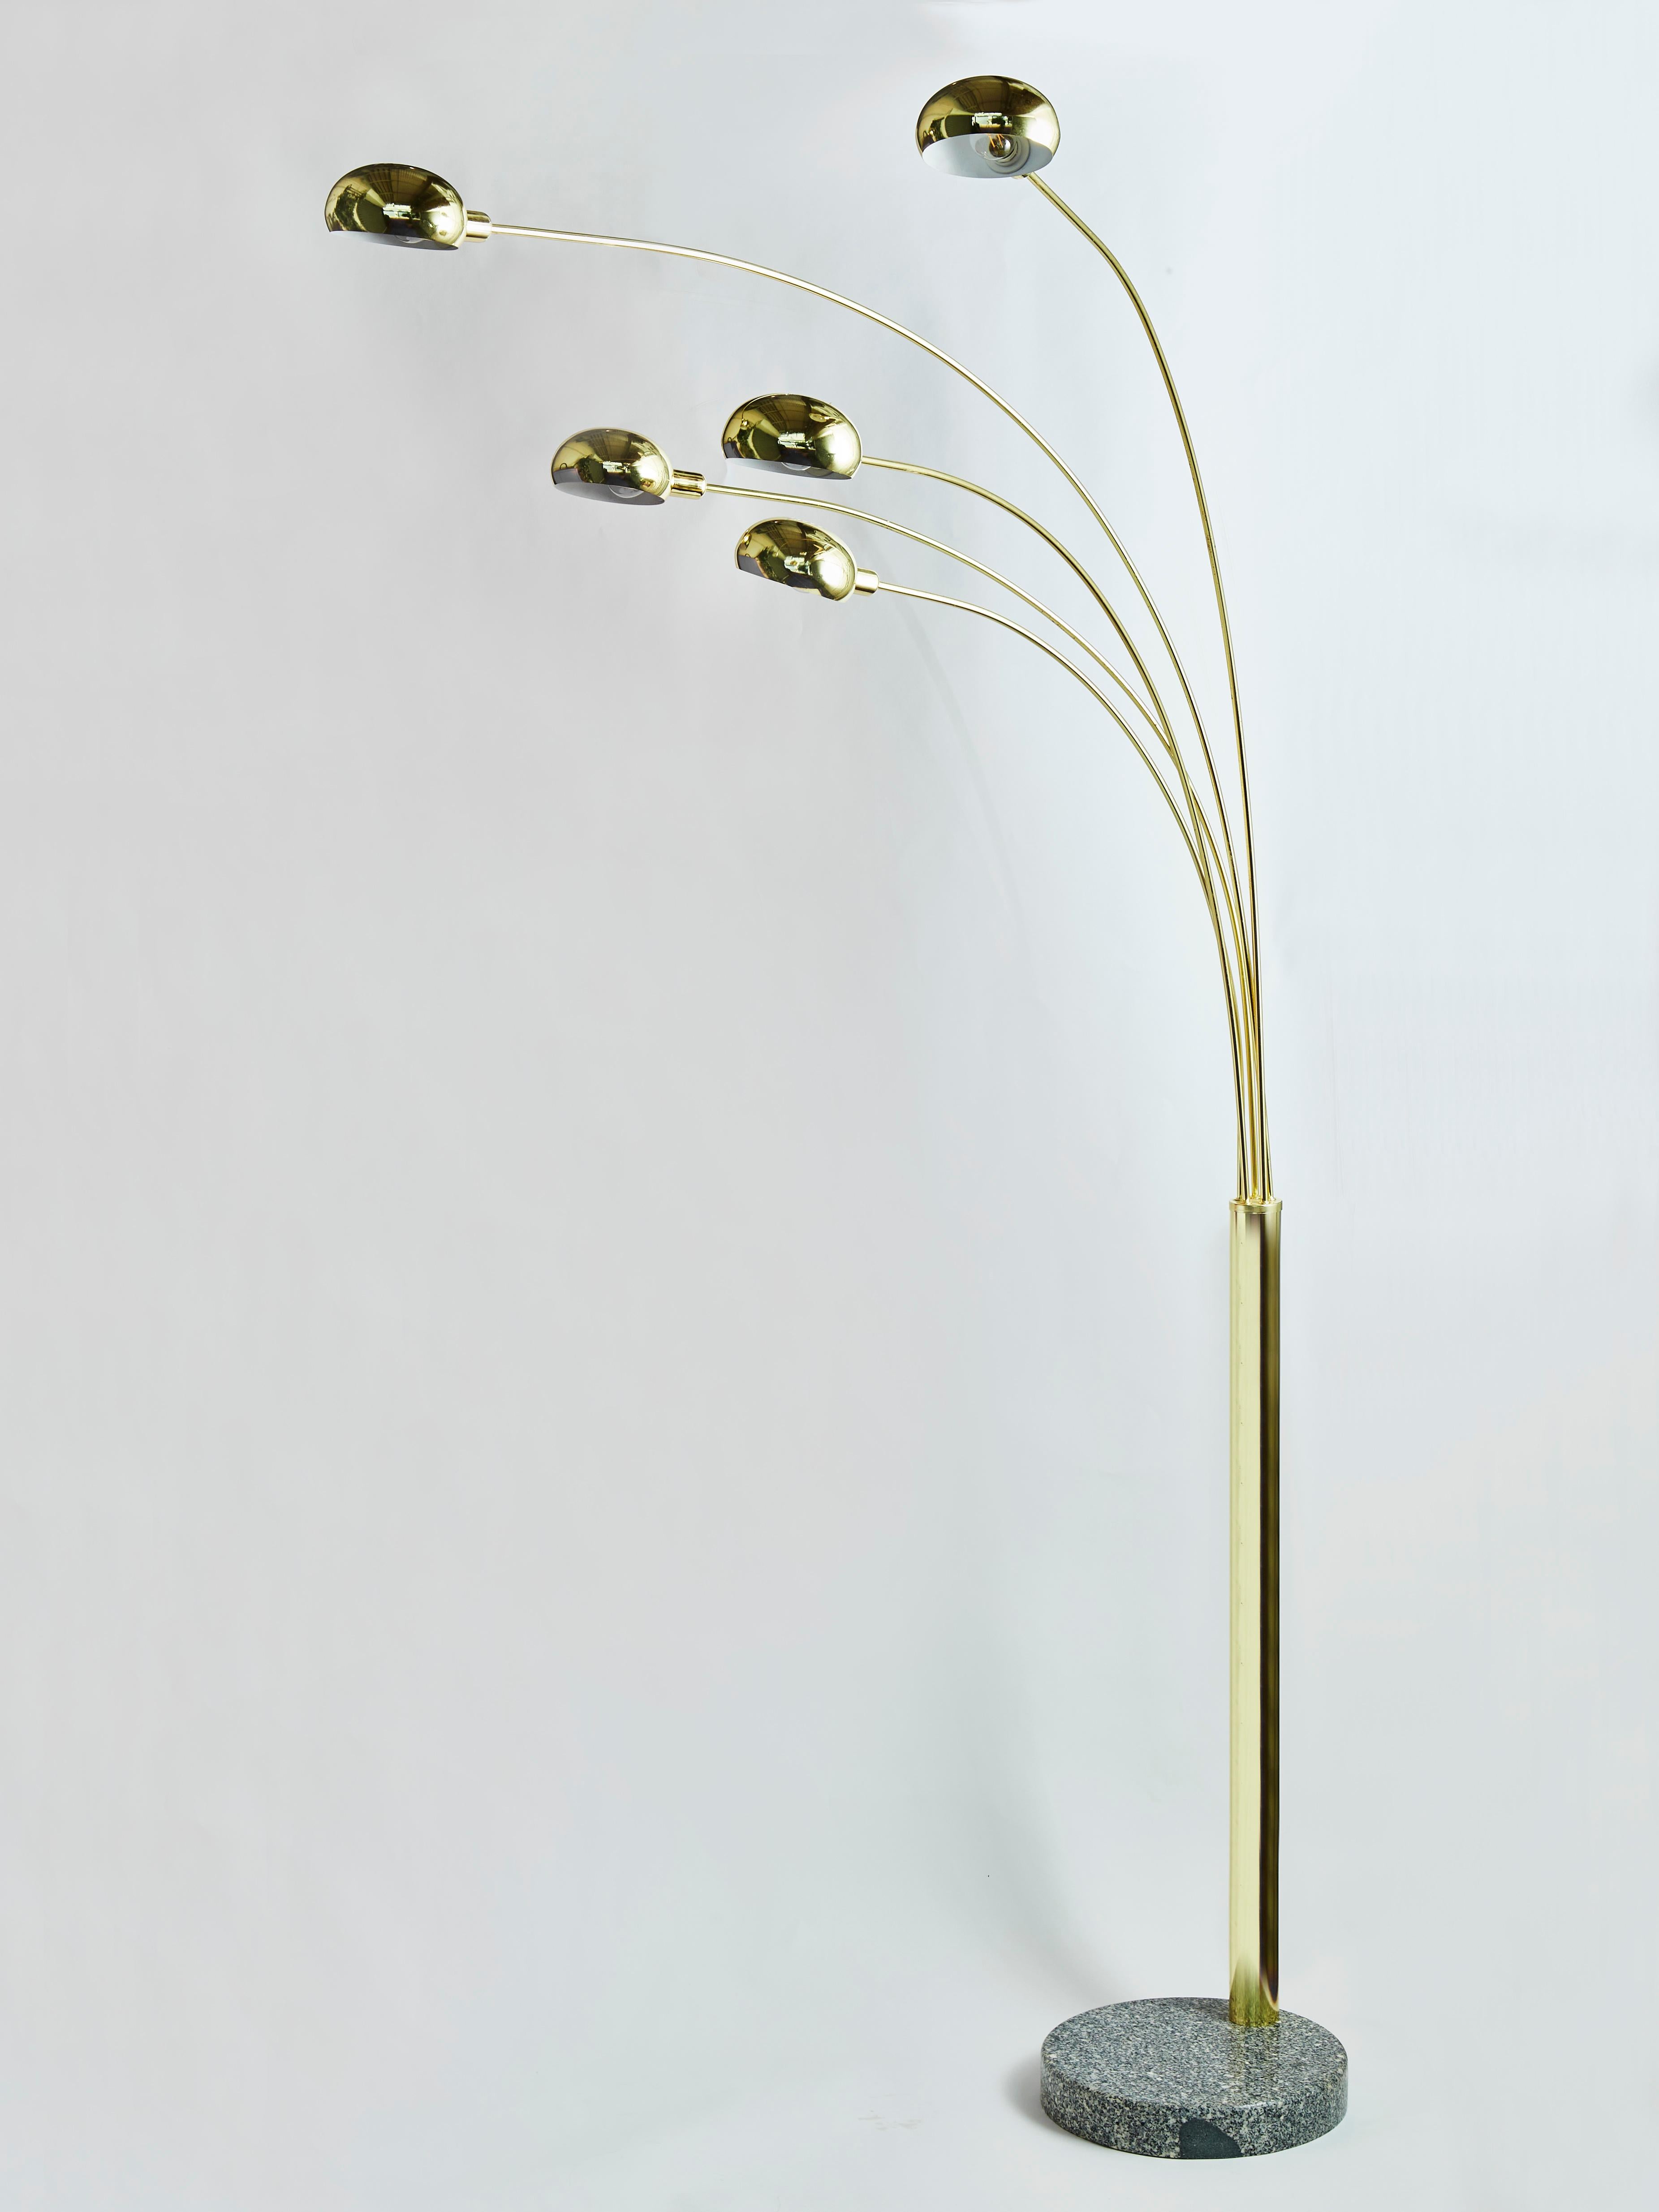 Swedish arc floor lamp, made of a speckled marble foot and brass body and arms. Each of them five is adjustable as well as the sconces.